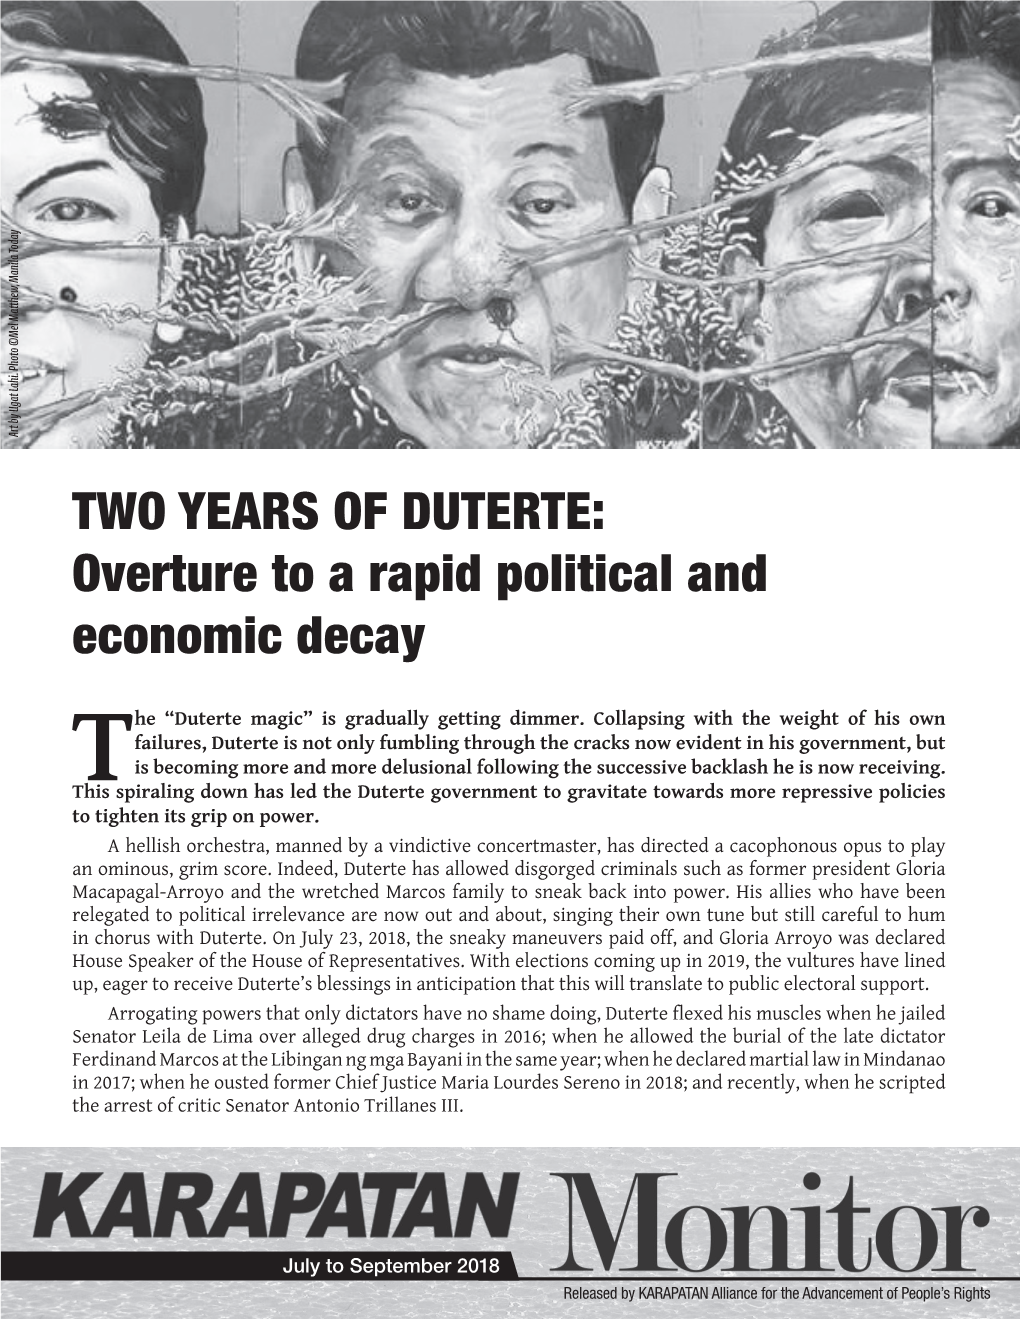 TWO YEARS of DUTERTE: Overture to a Rapid Political and Economic Decay